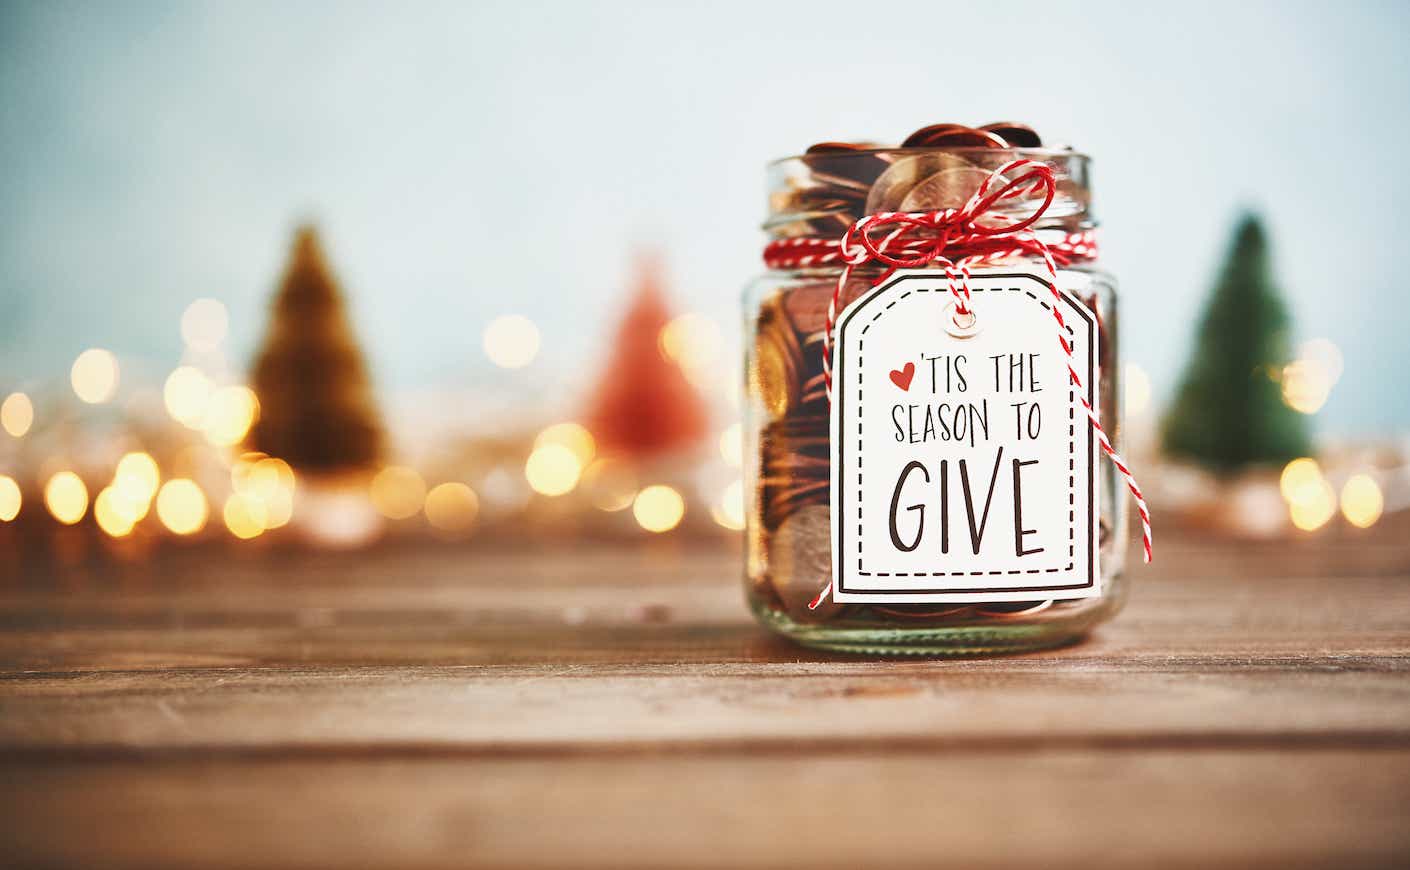 Donation jar with money and a sign that says "tis the season for giving"